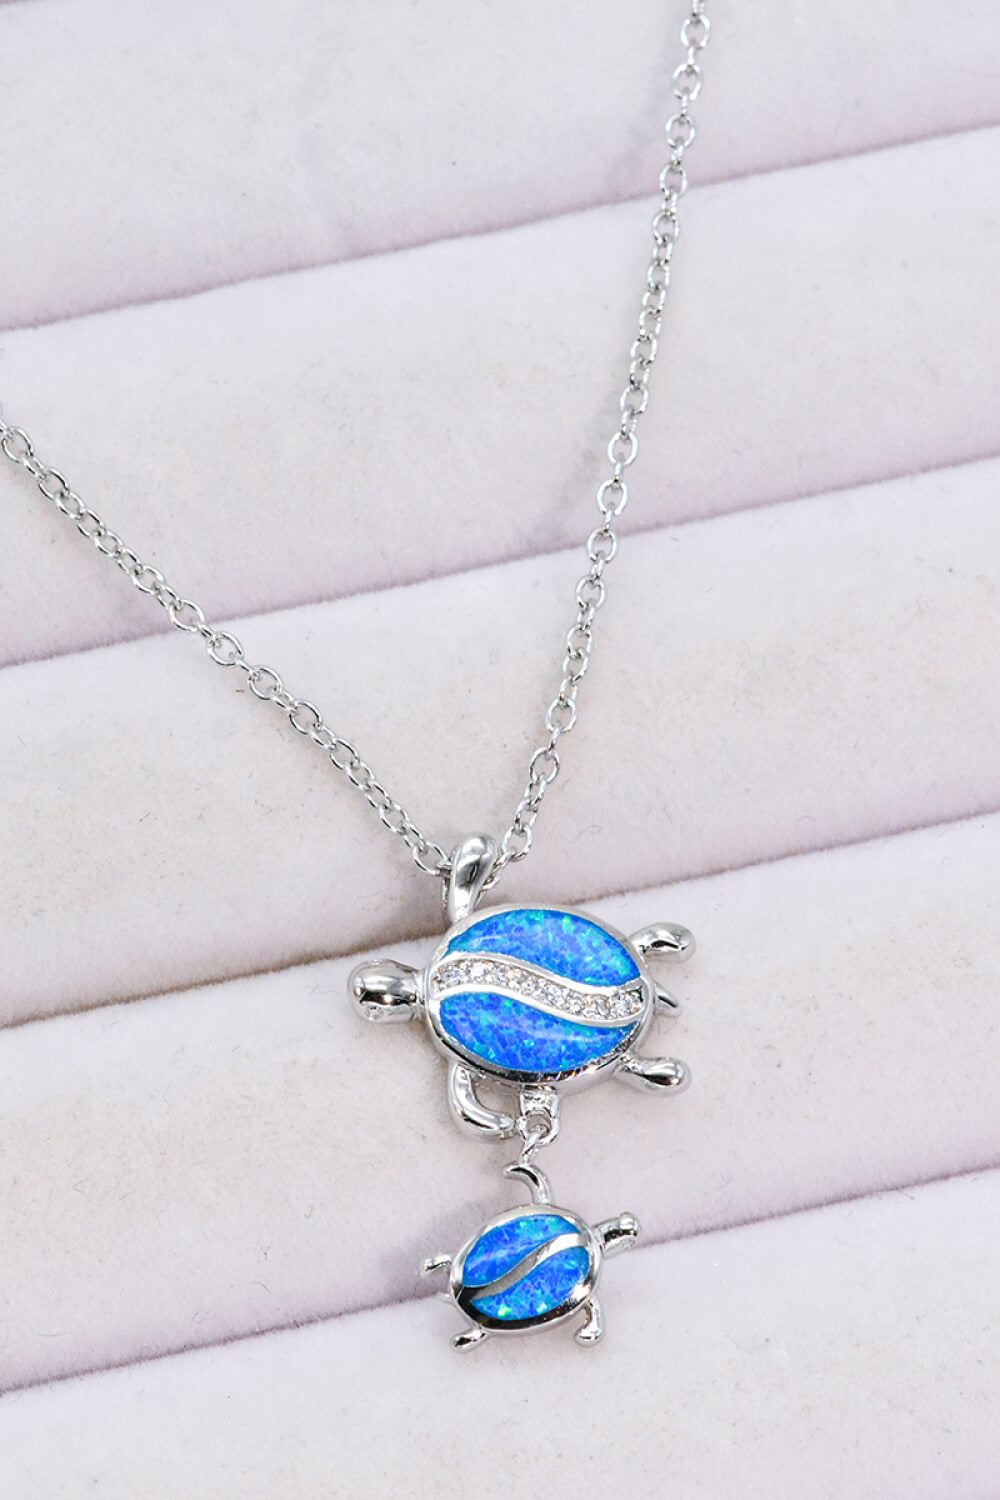 Opal Turtle Pendant Necklace - Tophatter Shopping Deals - Electronics, Jewelry, Auction, App, Bidding, Gadgets, Fashion